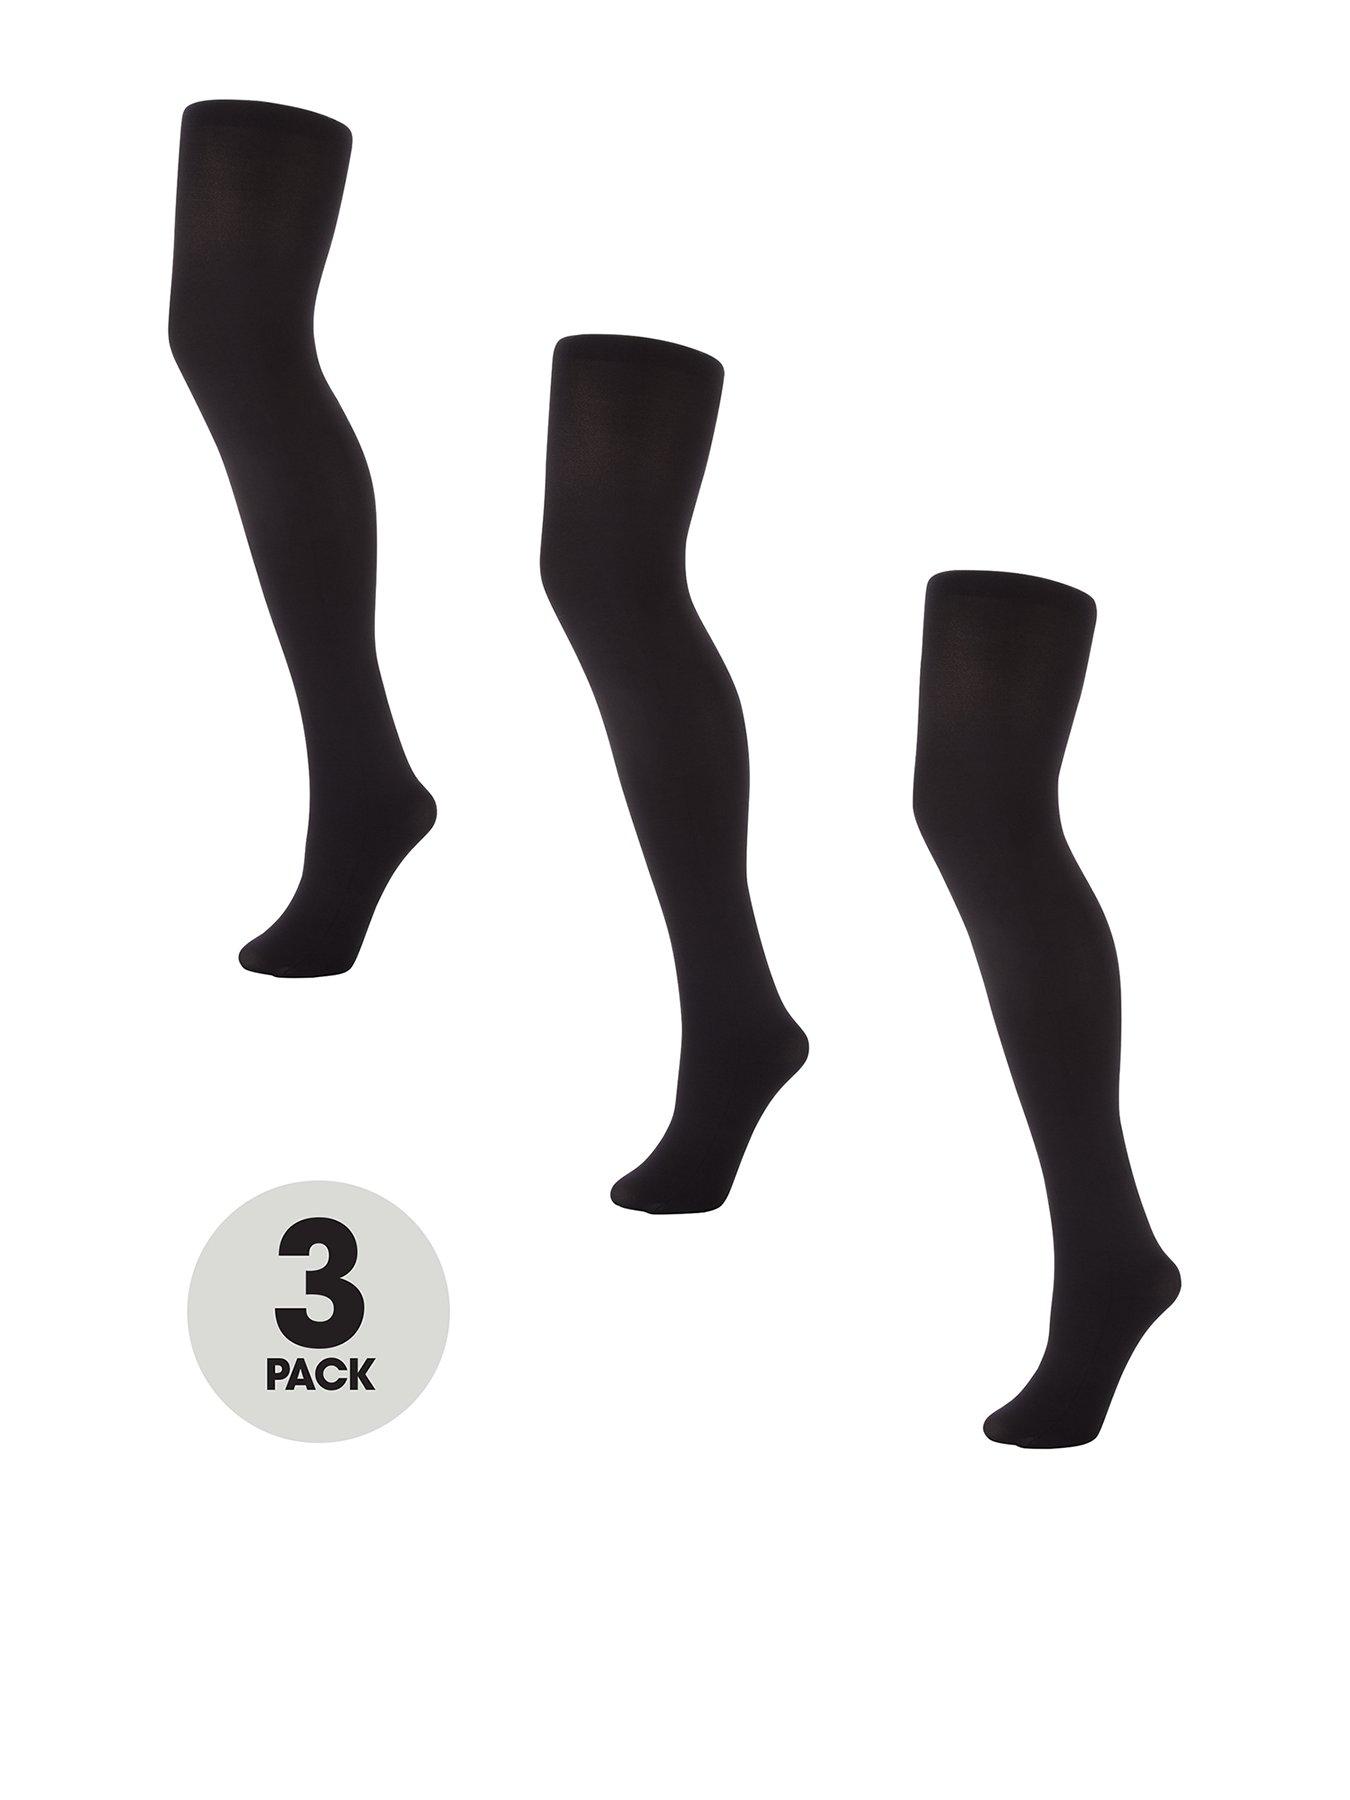 Hosiery For Men: Reviewed: Pretty Polly 40 Denier Opaque